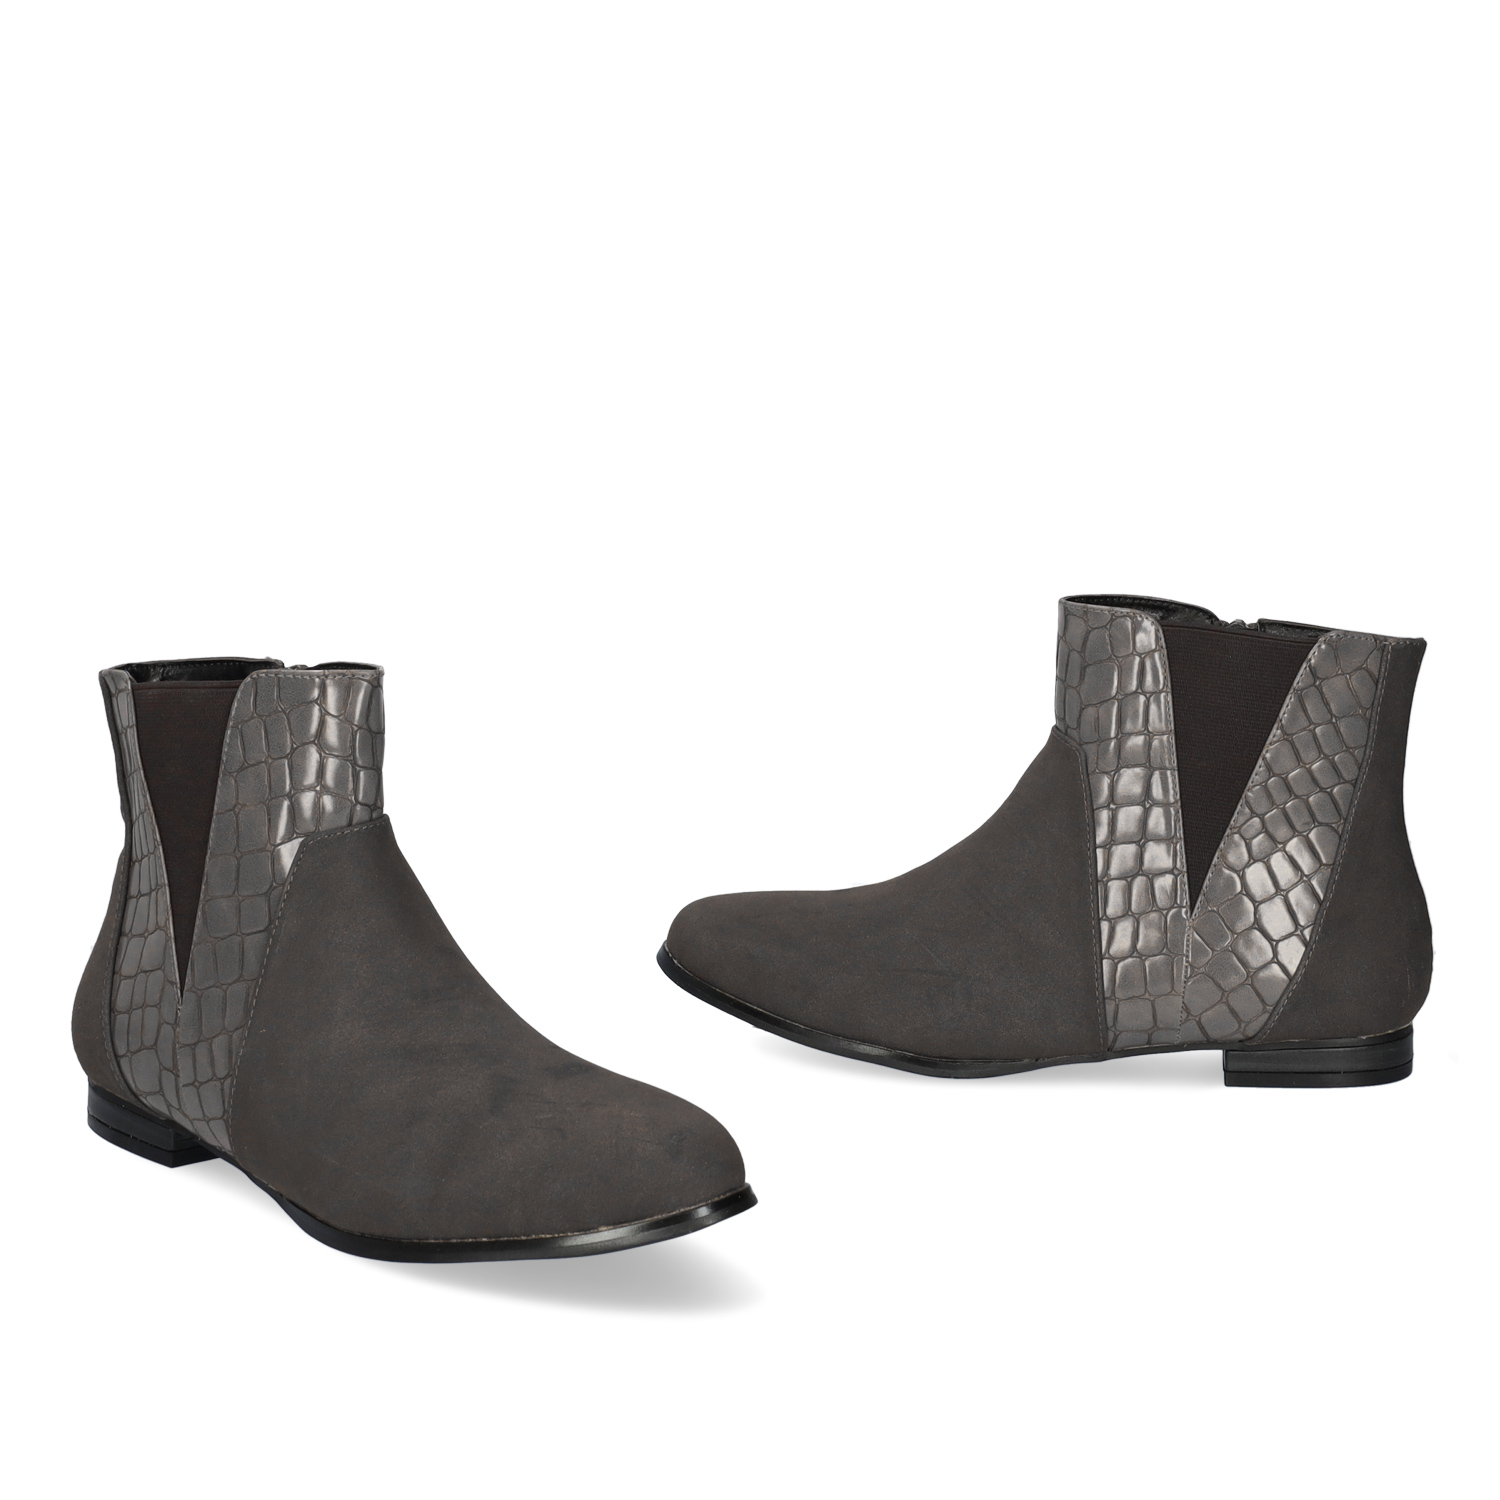 High-top booties in grey croc and faux suede 